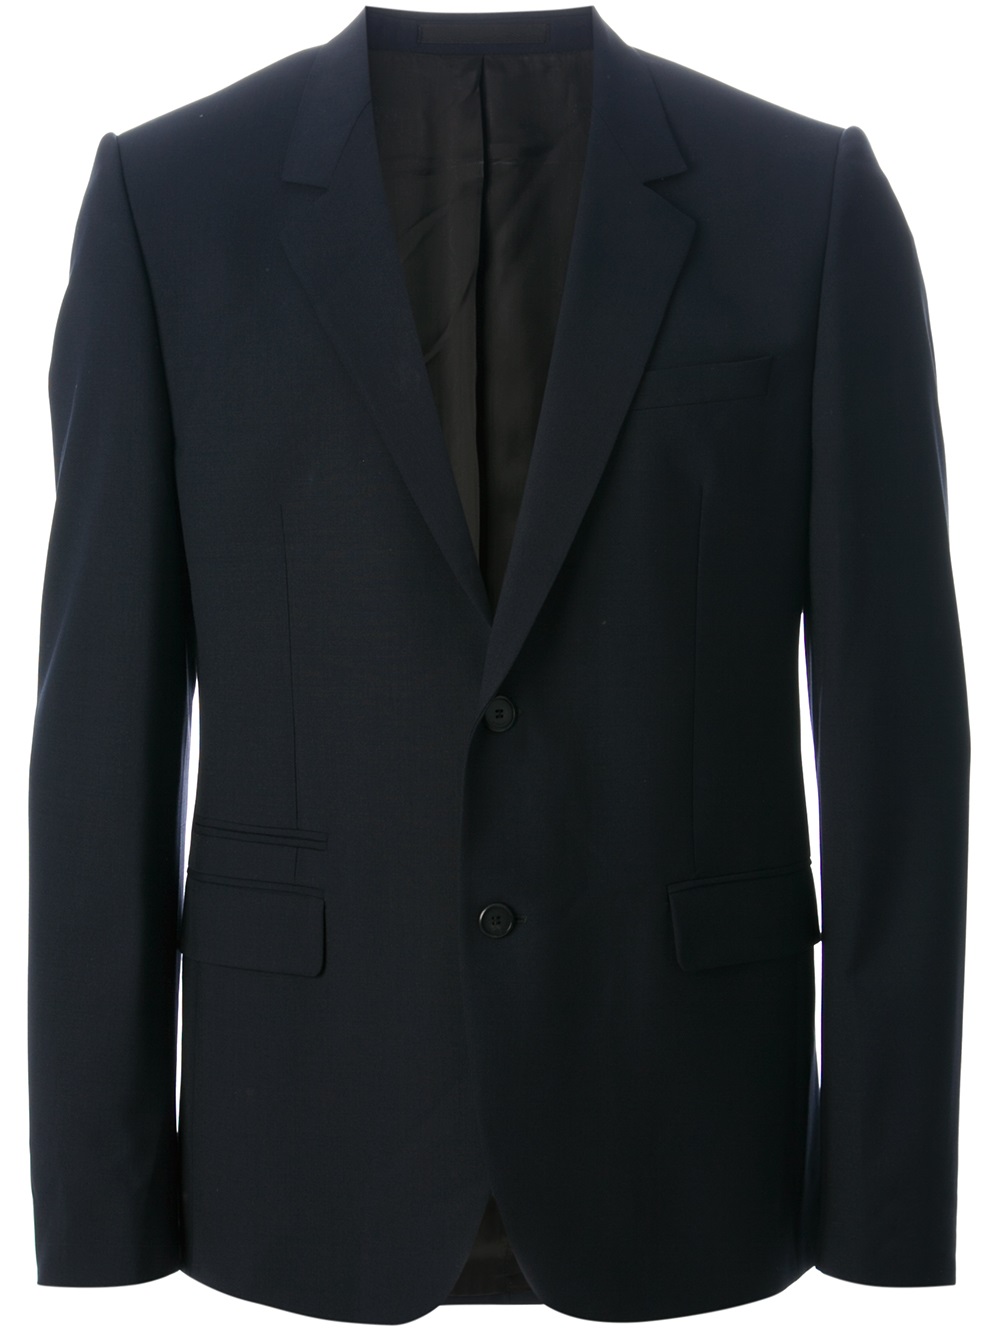 Lyst - Givenchy Tailored Suit in Blue for Men